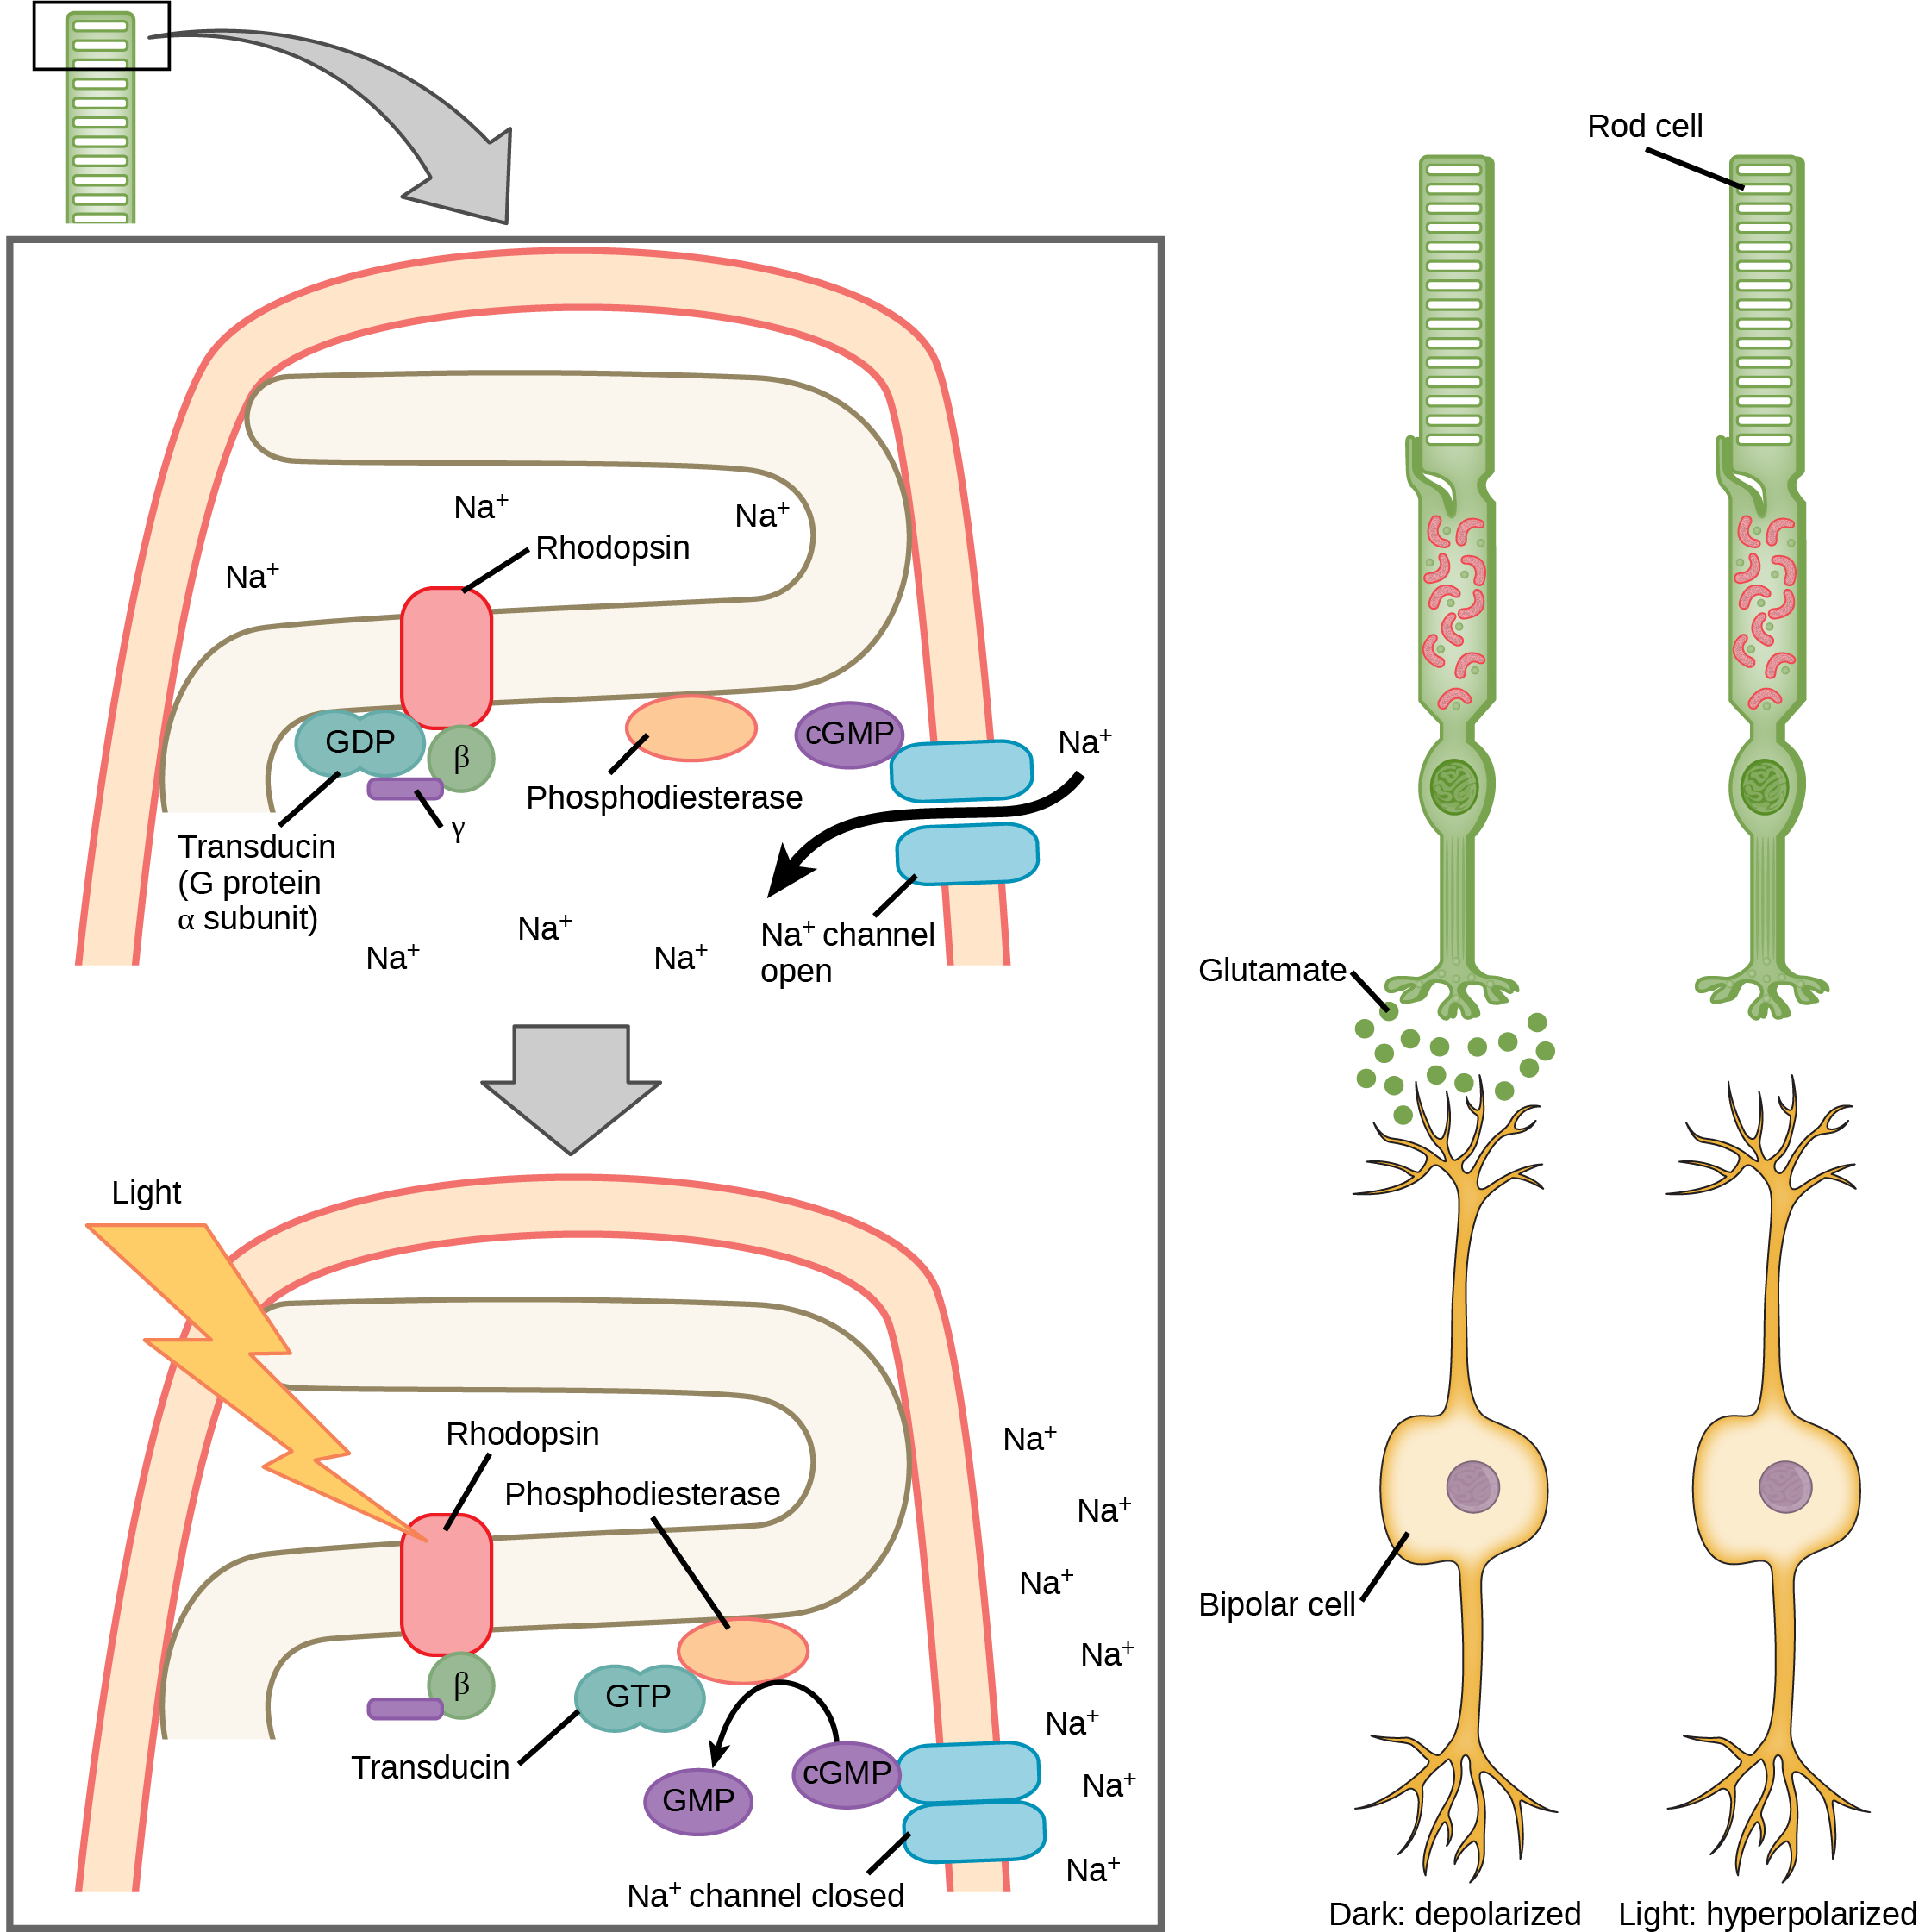 Illustration A shows the signal transduction pathway for rhodopsin, which is located in internal membranes at the top of rod cells. When light strikes rhodopsin, a G protein called transducing is activated. Transducin has three subunits, alpha, beta and gamma. Upon activation, G D P on the alpha subunit is replaced with G T P. The subunit dissociates, and binds phosphodiesterase. Phosphodiesterase, in turn, converts c G M P to G M P, which closes sodium ion channels. As a result, sodium can no longer enter the cell, and the membrane becomes hyperpolarized. Illustration b shows that the tall, thin rod cell is stacked on top of a bipolar nerve cell. In the dark the membrane is depolarized, and glutamate is released from the rod cell to the axon terminal of the bipolar cell. In the light, no glutamate is released.